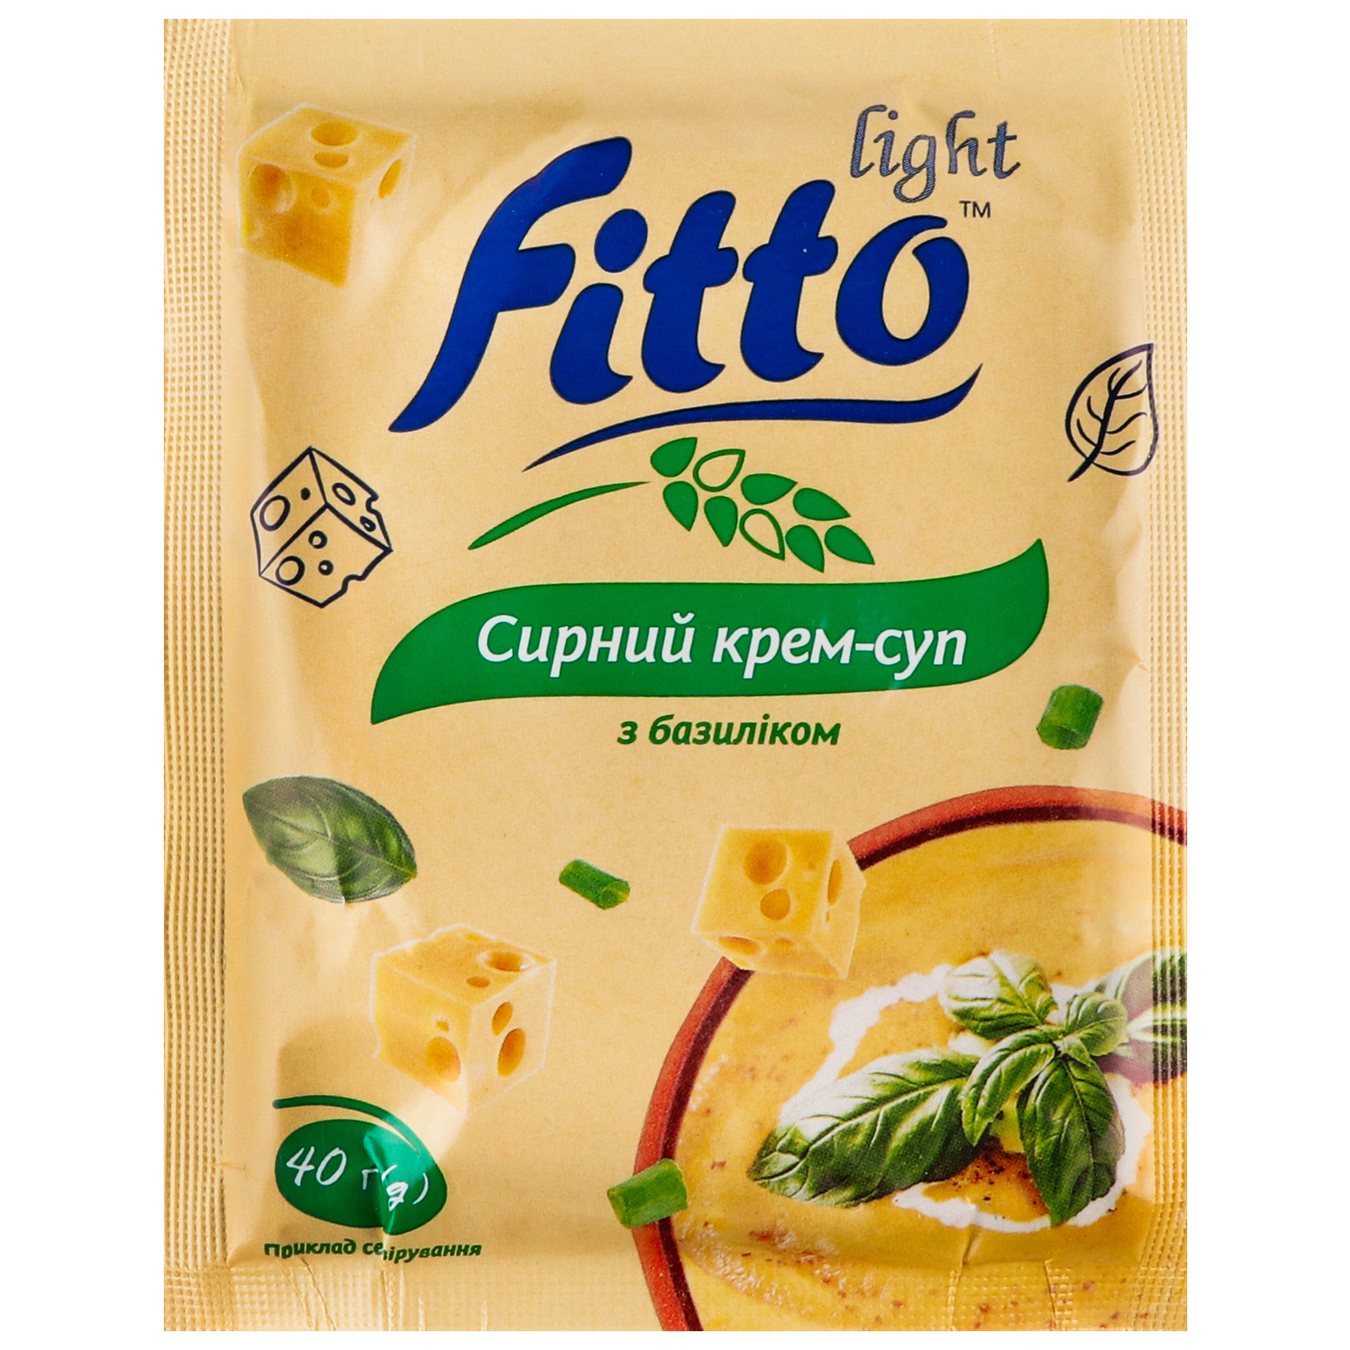 Fitto light cheese cream soup with basil 40g